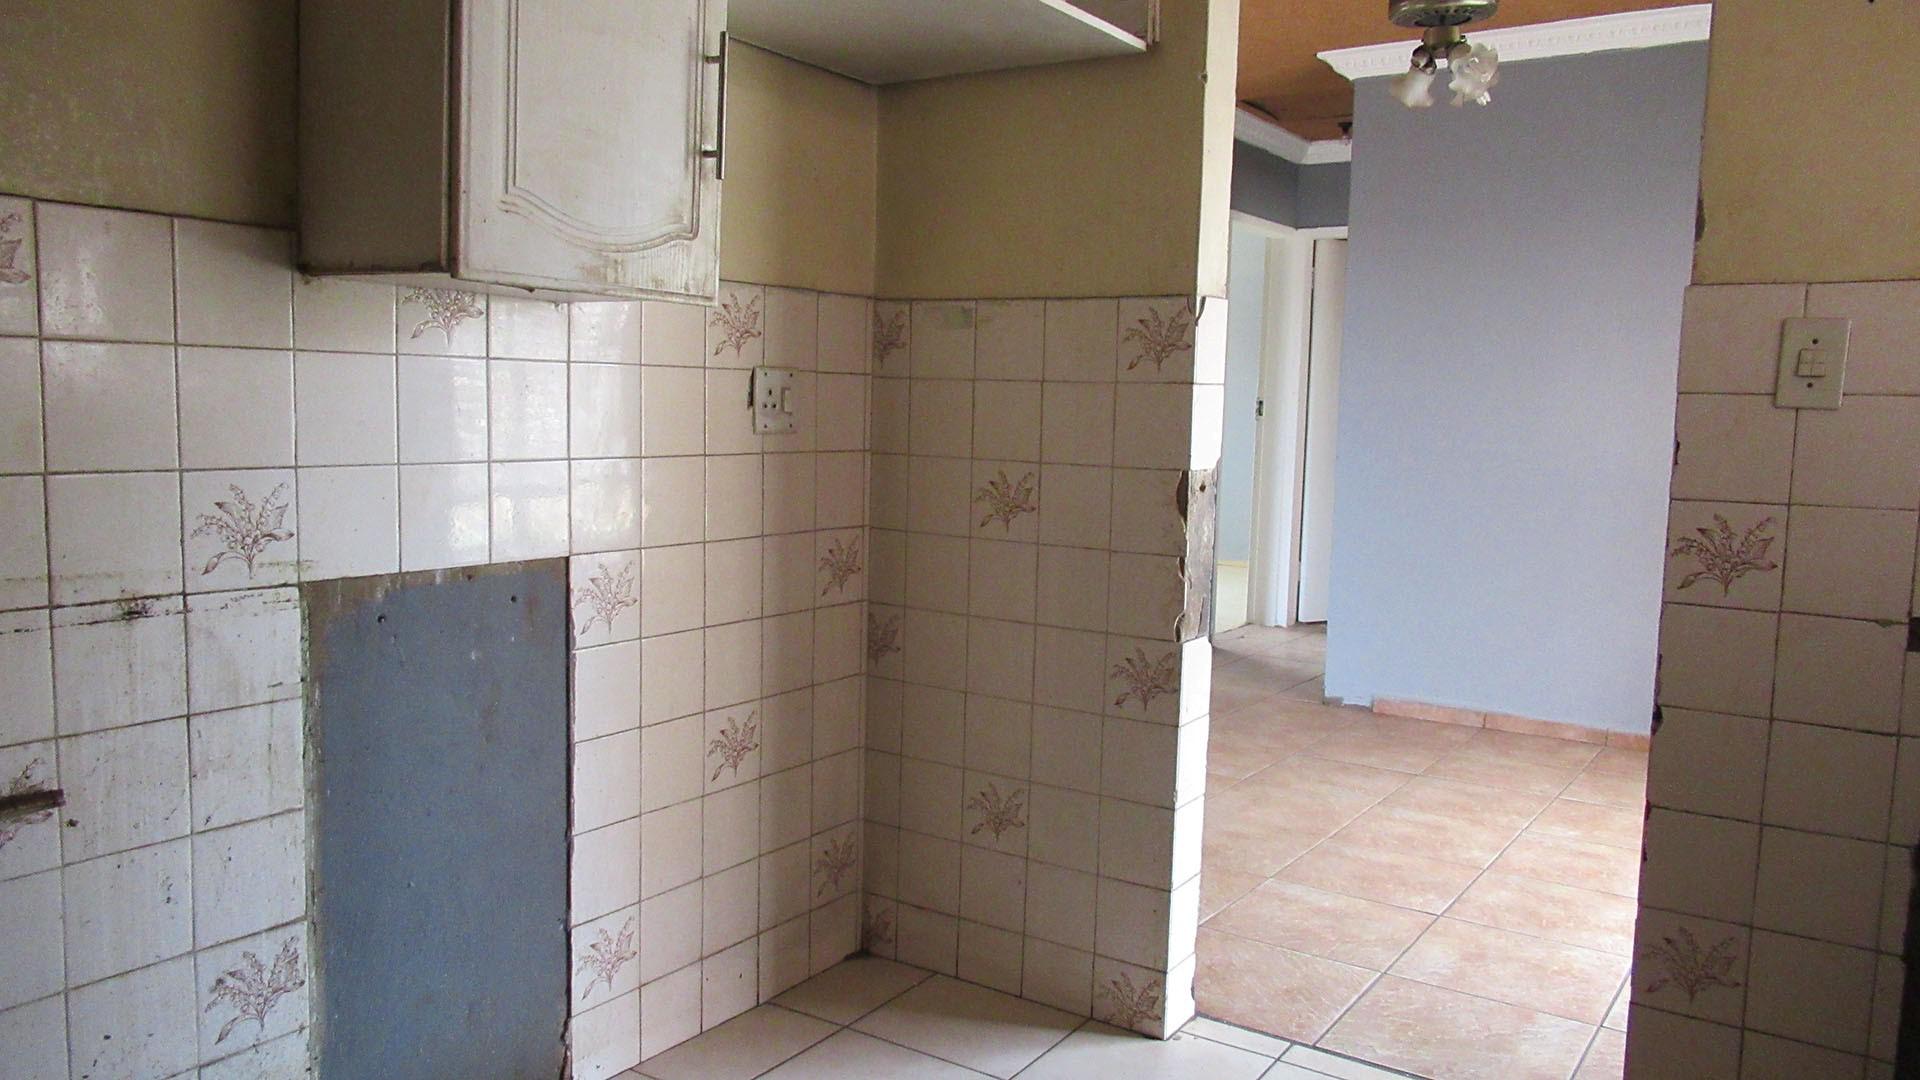 Kitchen - 9 square meters of property in Protea North